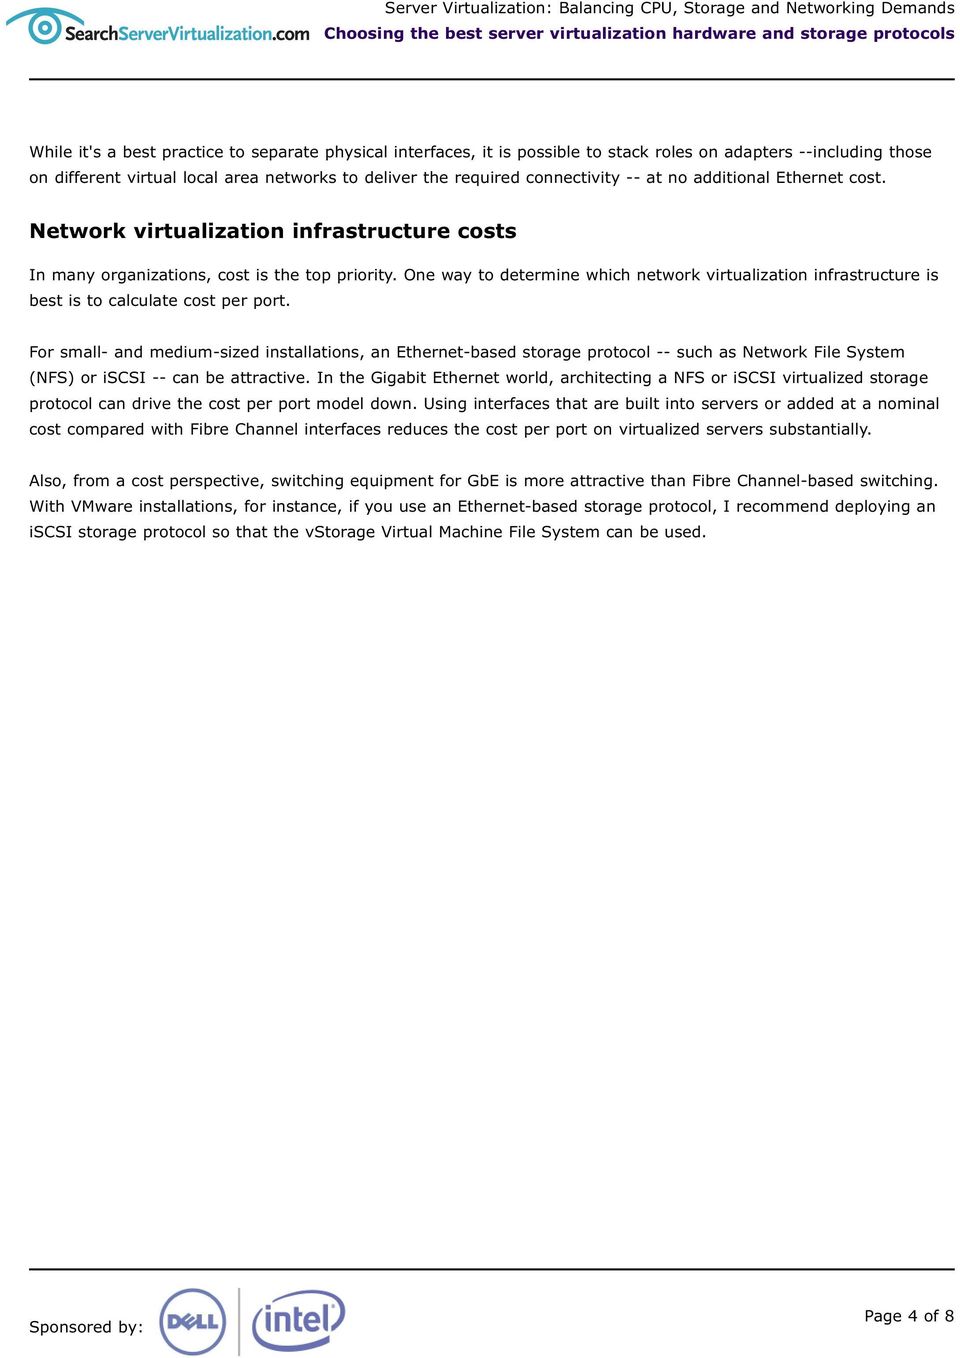 Network virtualization infrastructure costs In many organizations, cost is the top priority. One way to determine which network virtualization infrastructure is best is to calculate cost per port.